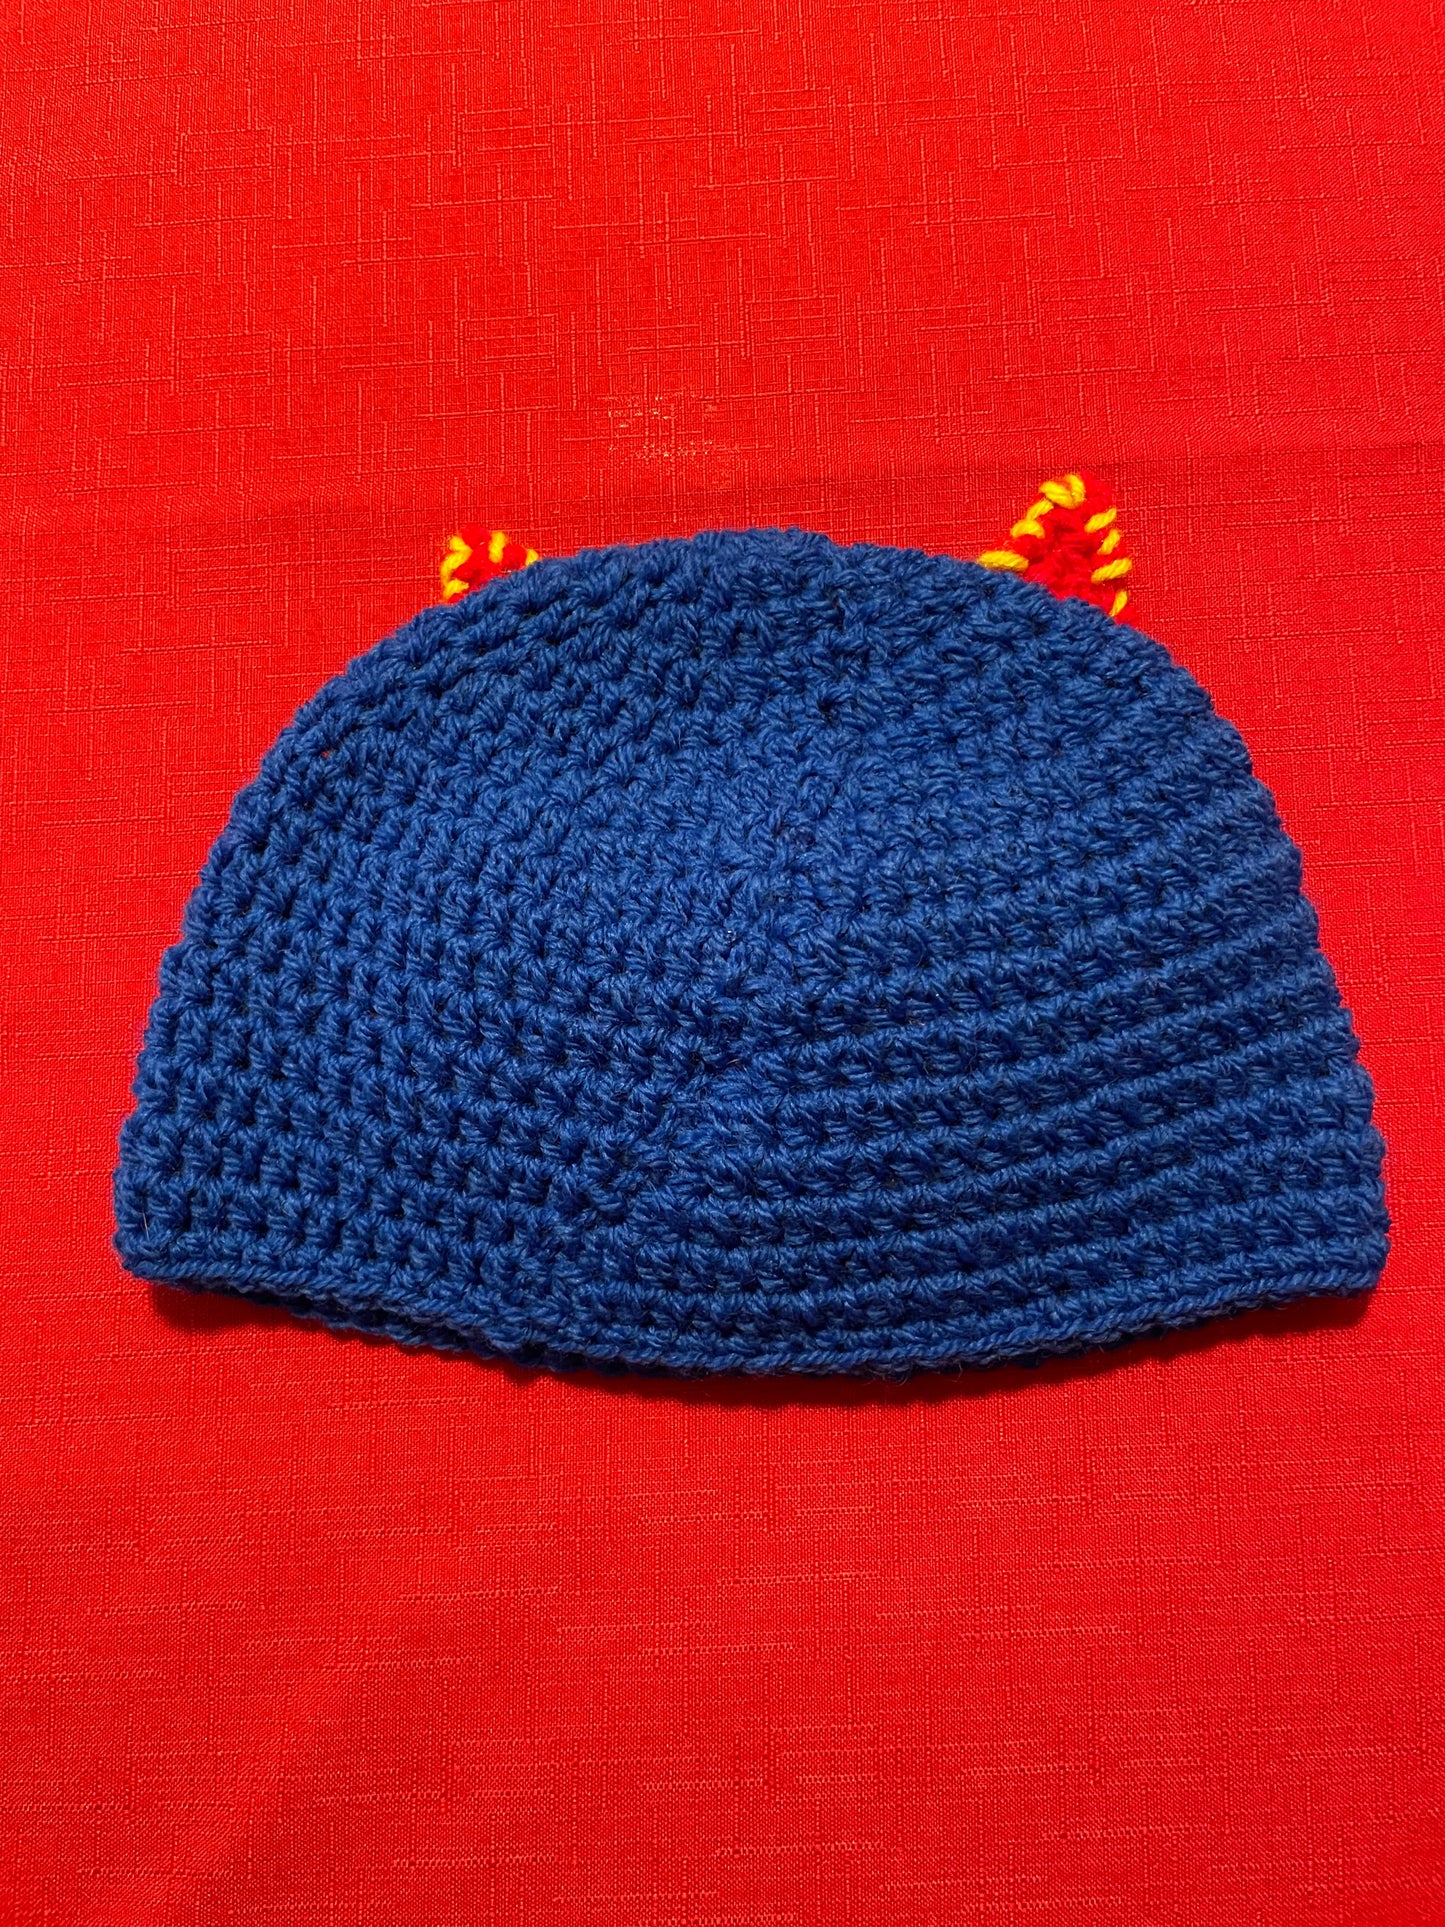 Chucho beanies - hand made LIMITED EDITION